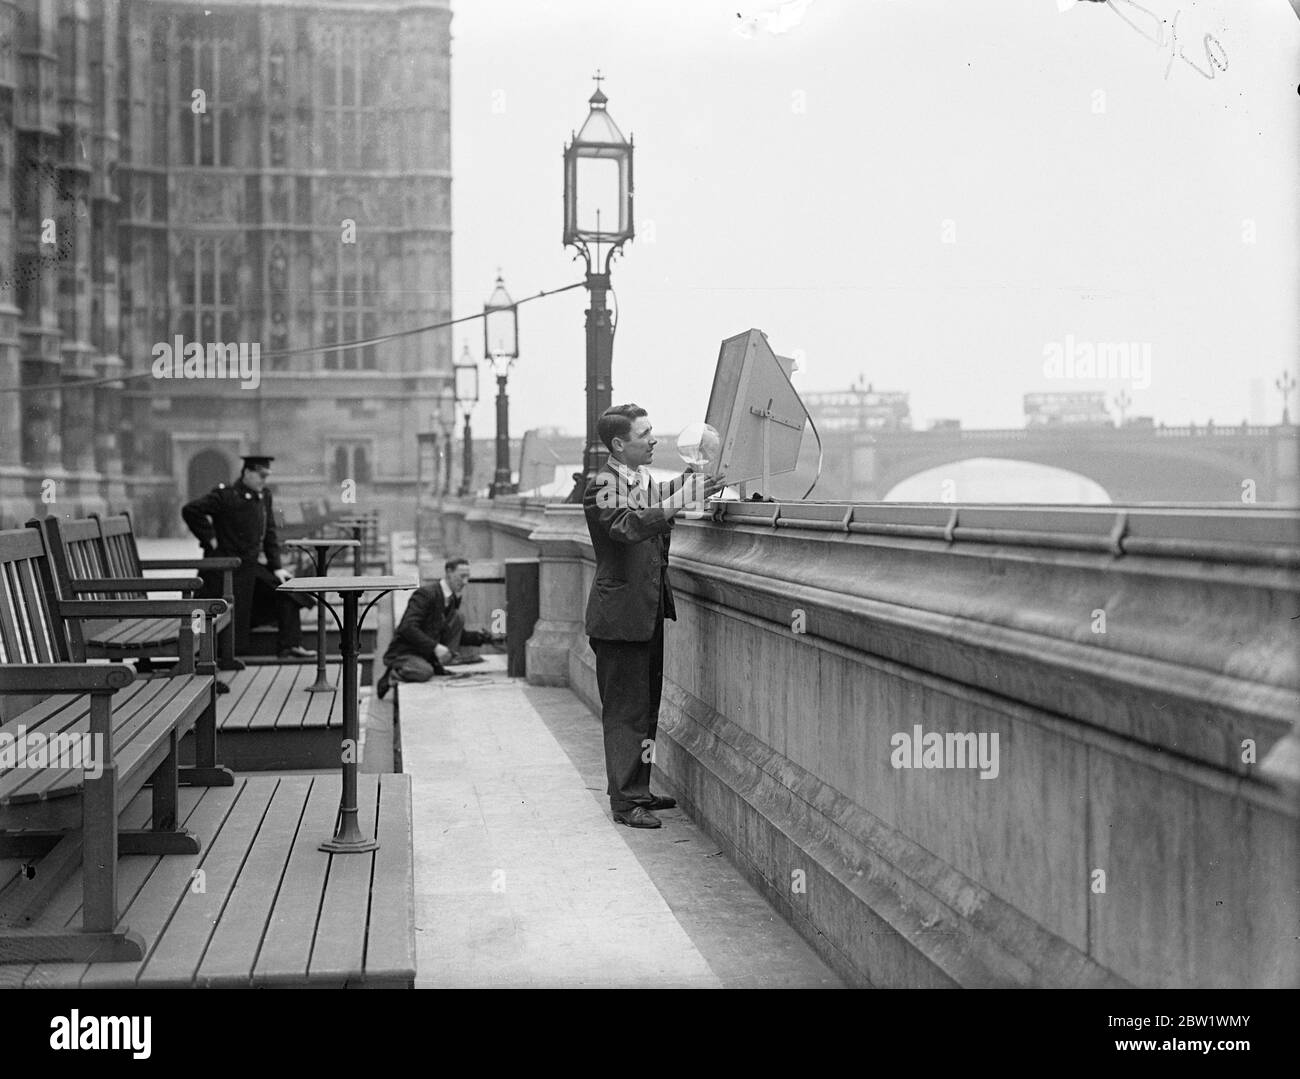 Parliament to be flood lighted for Coronation. Large floodlights are being fixed on the Terrace of the Houses of Commons in preparation for the floodlighting of the Houses of Parliament during the Coronation. Photo shows, fixing one of the floodlights on the Houses of Commons terrace. 14 April 1937 Stock Photo